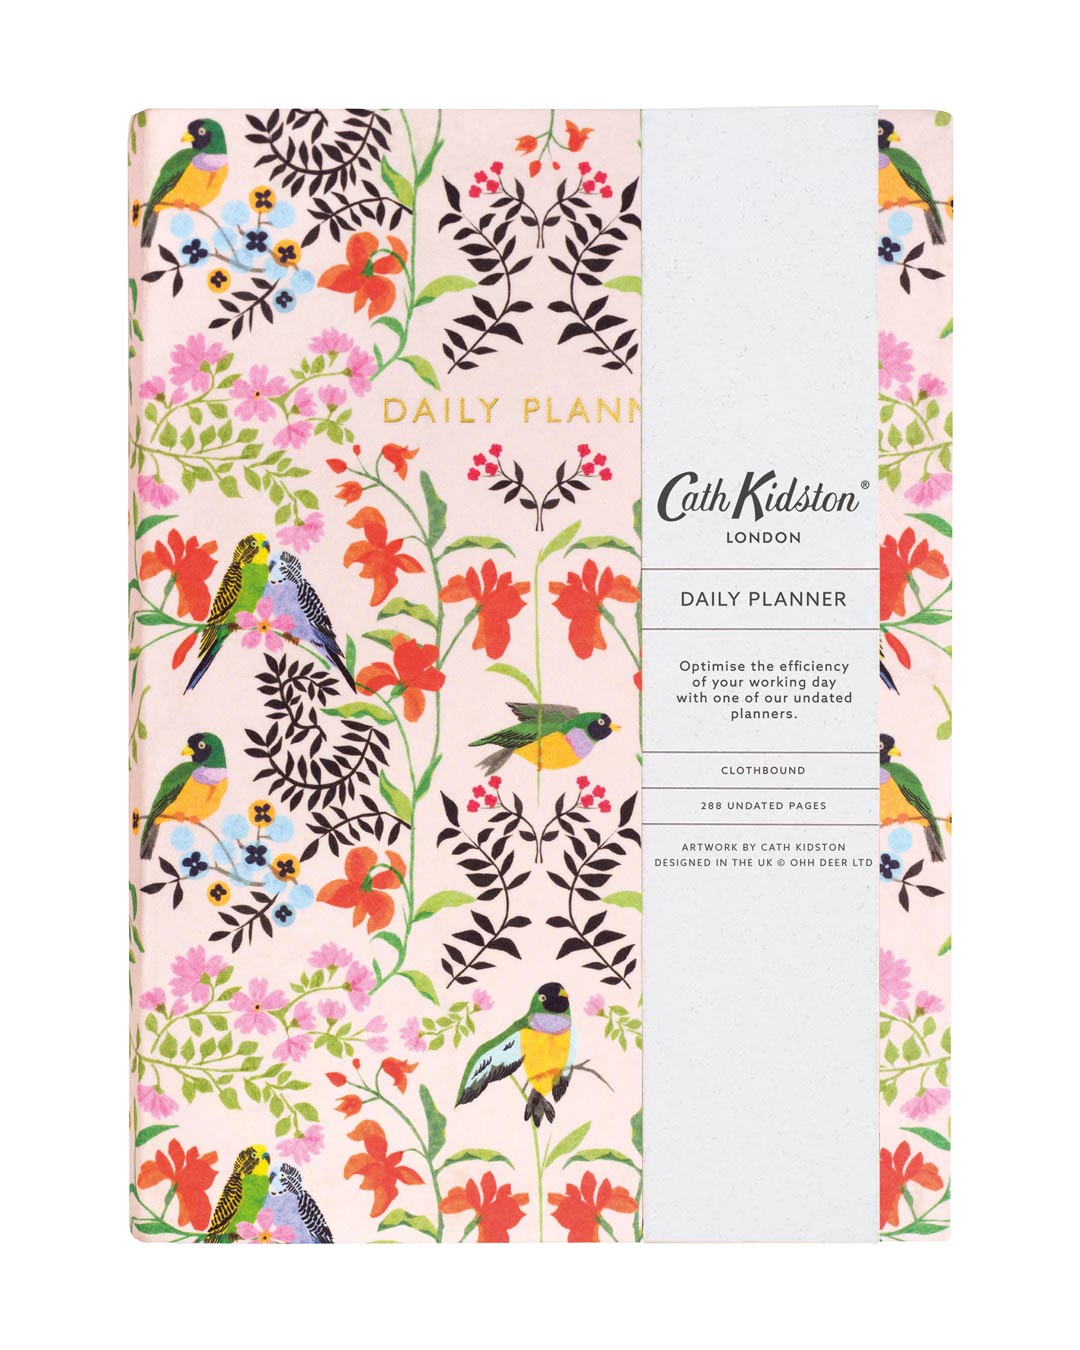 Daily Planner Notebook - Cath Kidston - Undated Productivity Journal - To Do List, Hourly Schedule, Priorities & Notes - A5 Organiser for Students, Home or Office - Bird Repeat Cream